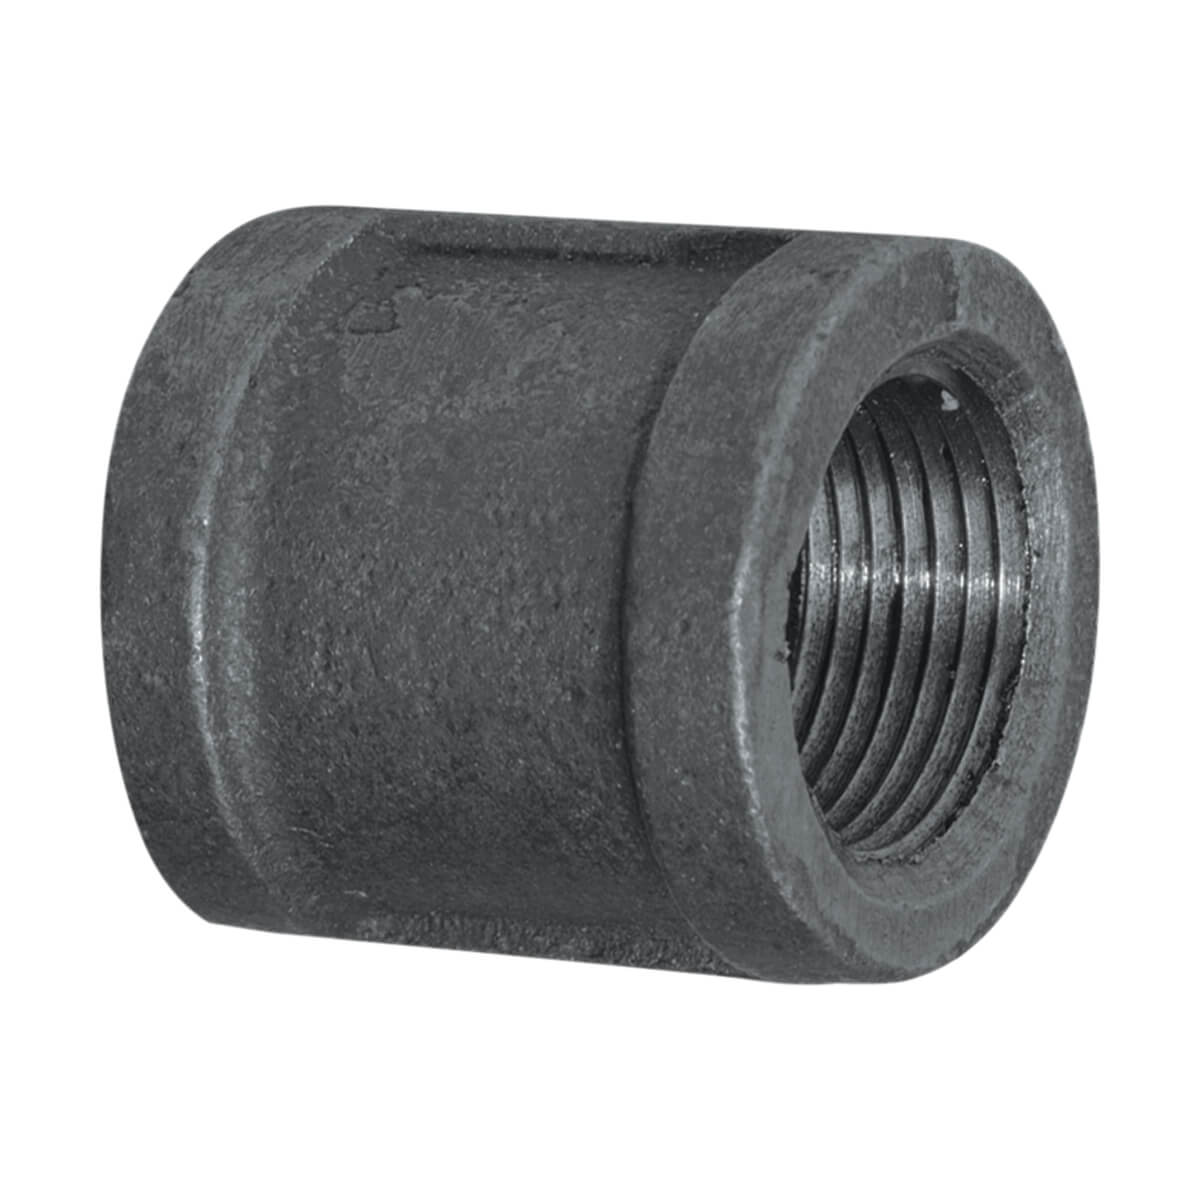 Fitting Black Iron Coupling - 1/2-in